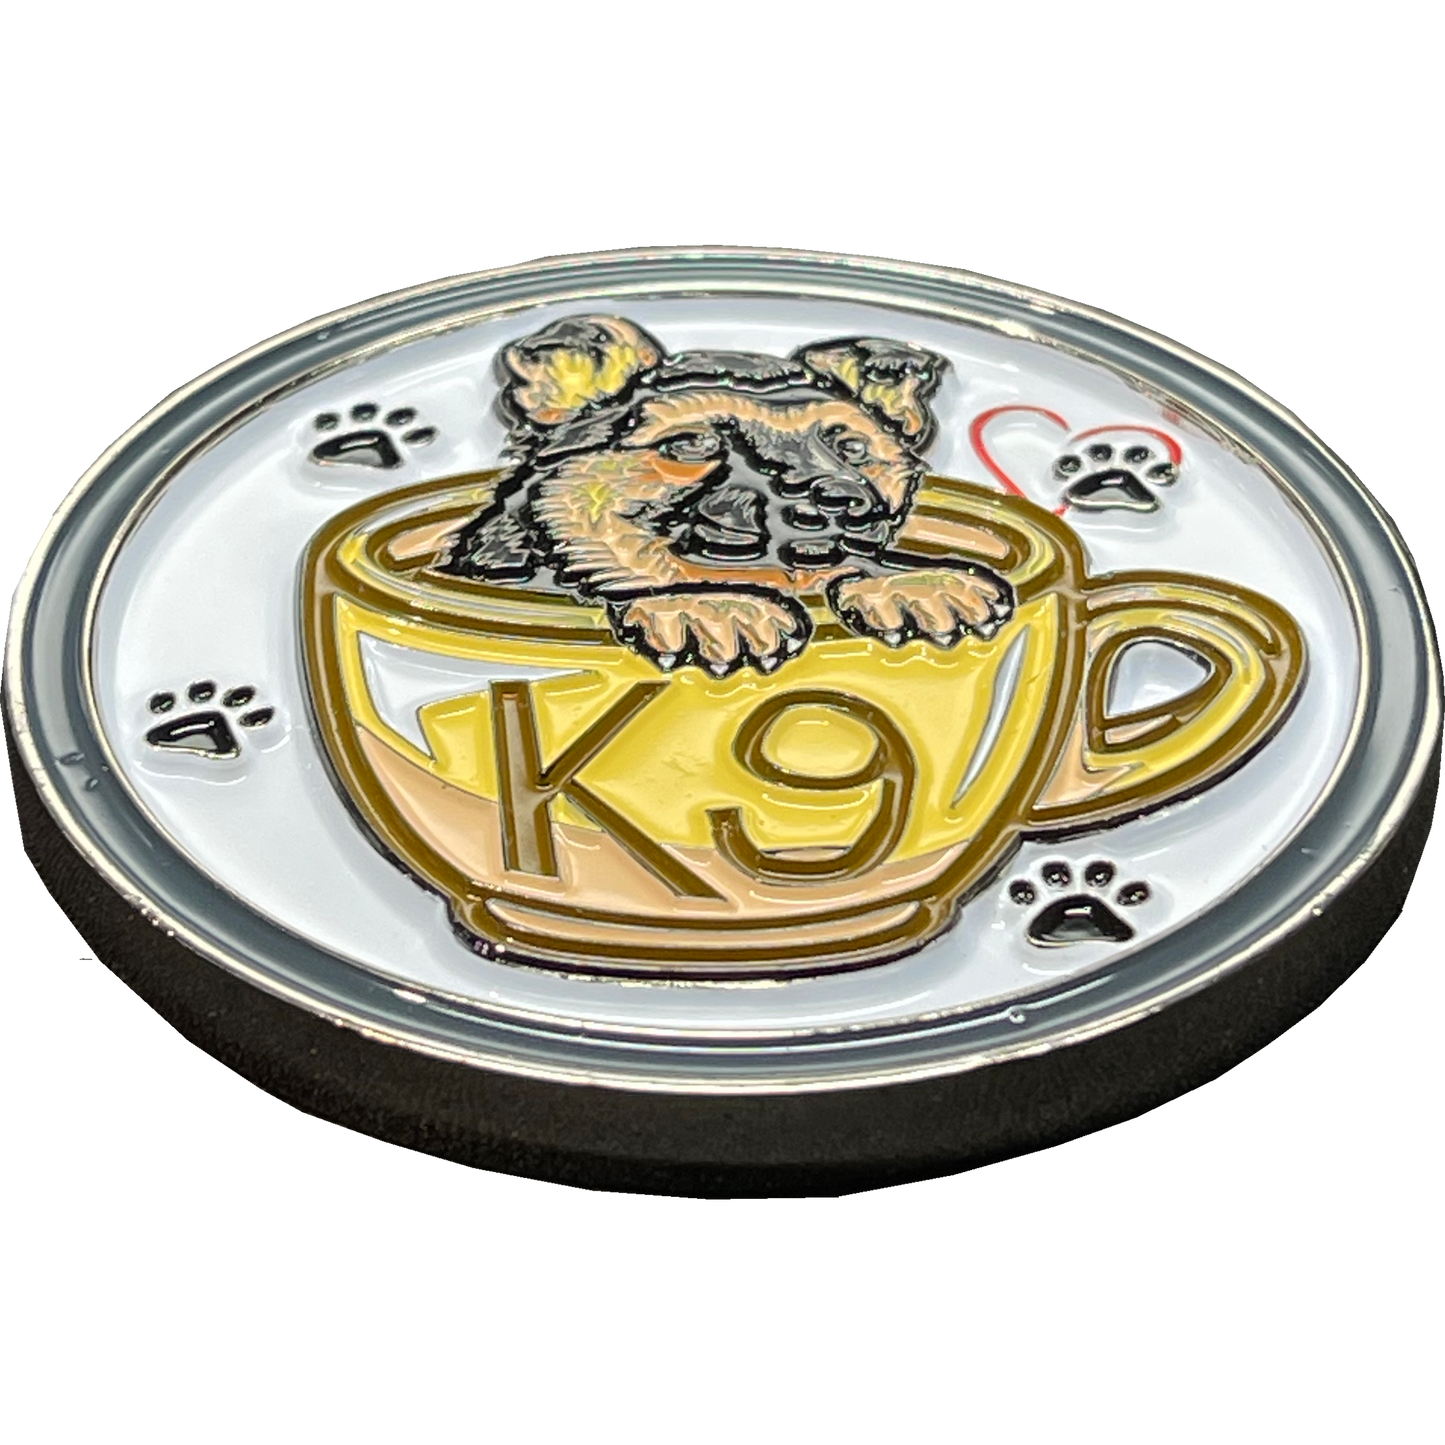 BL14-003 Cute K9 Puppy in coffee mug canine challenge coin police service dog handler